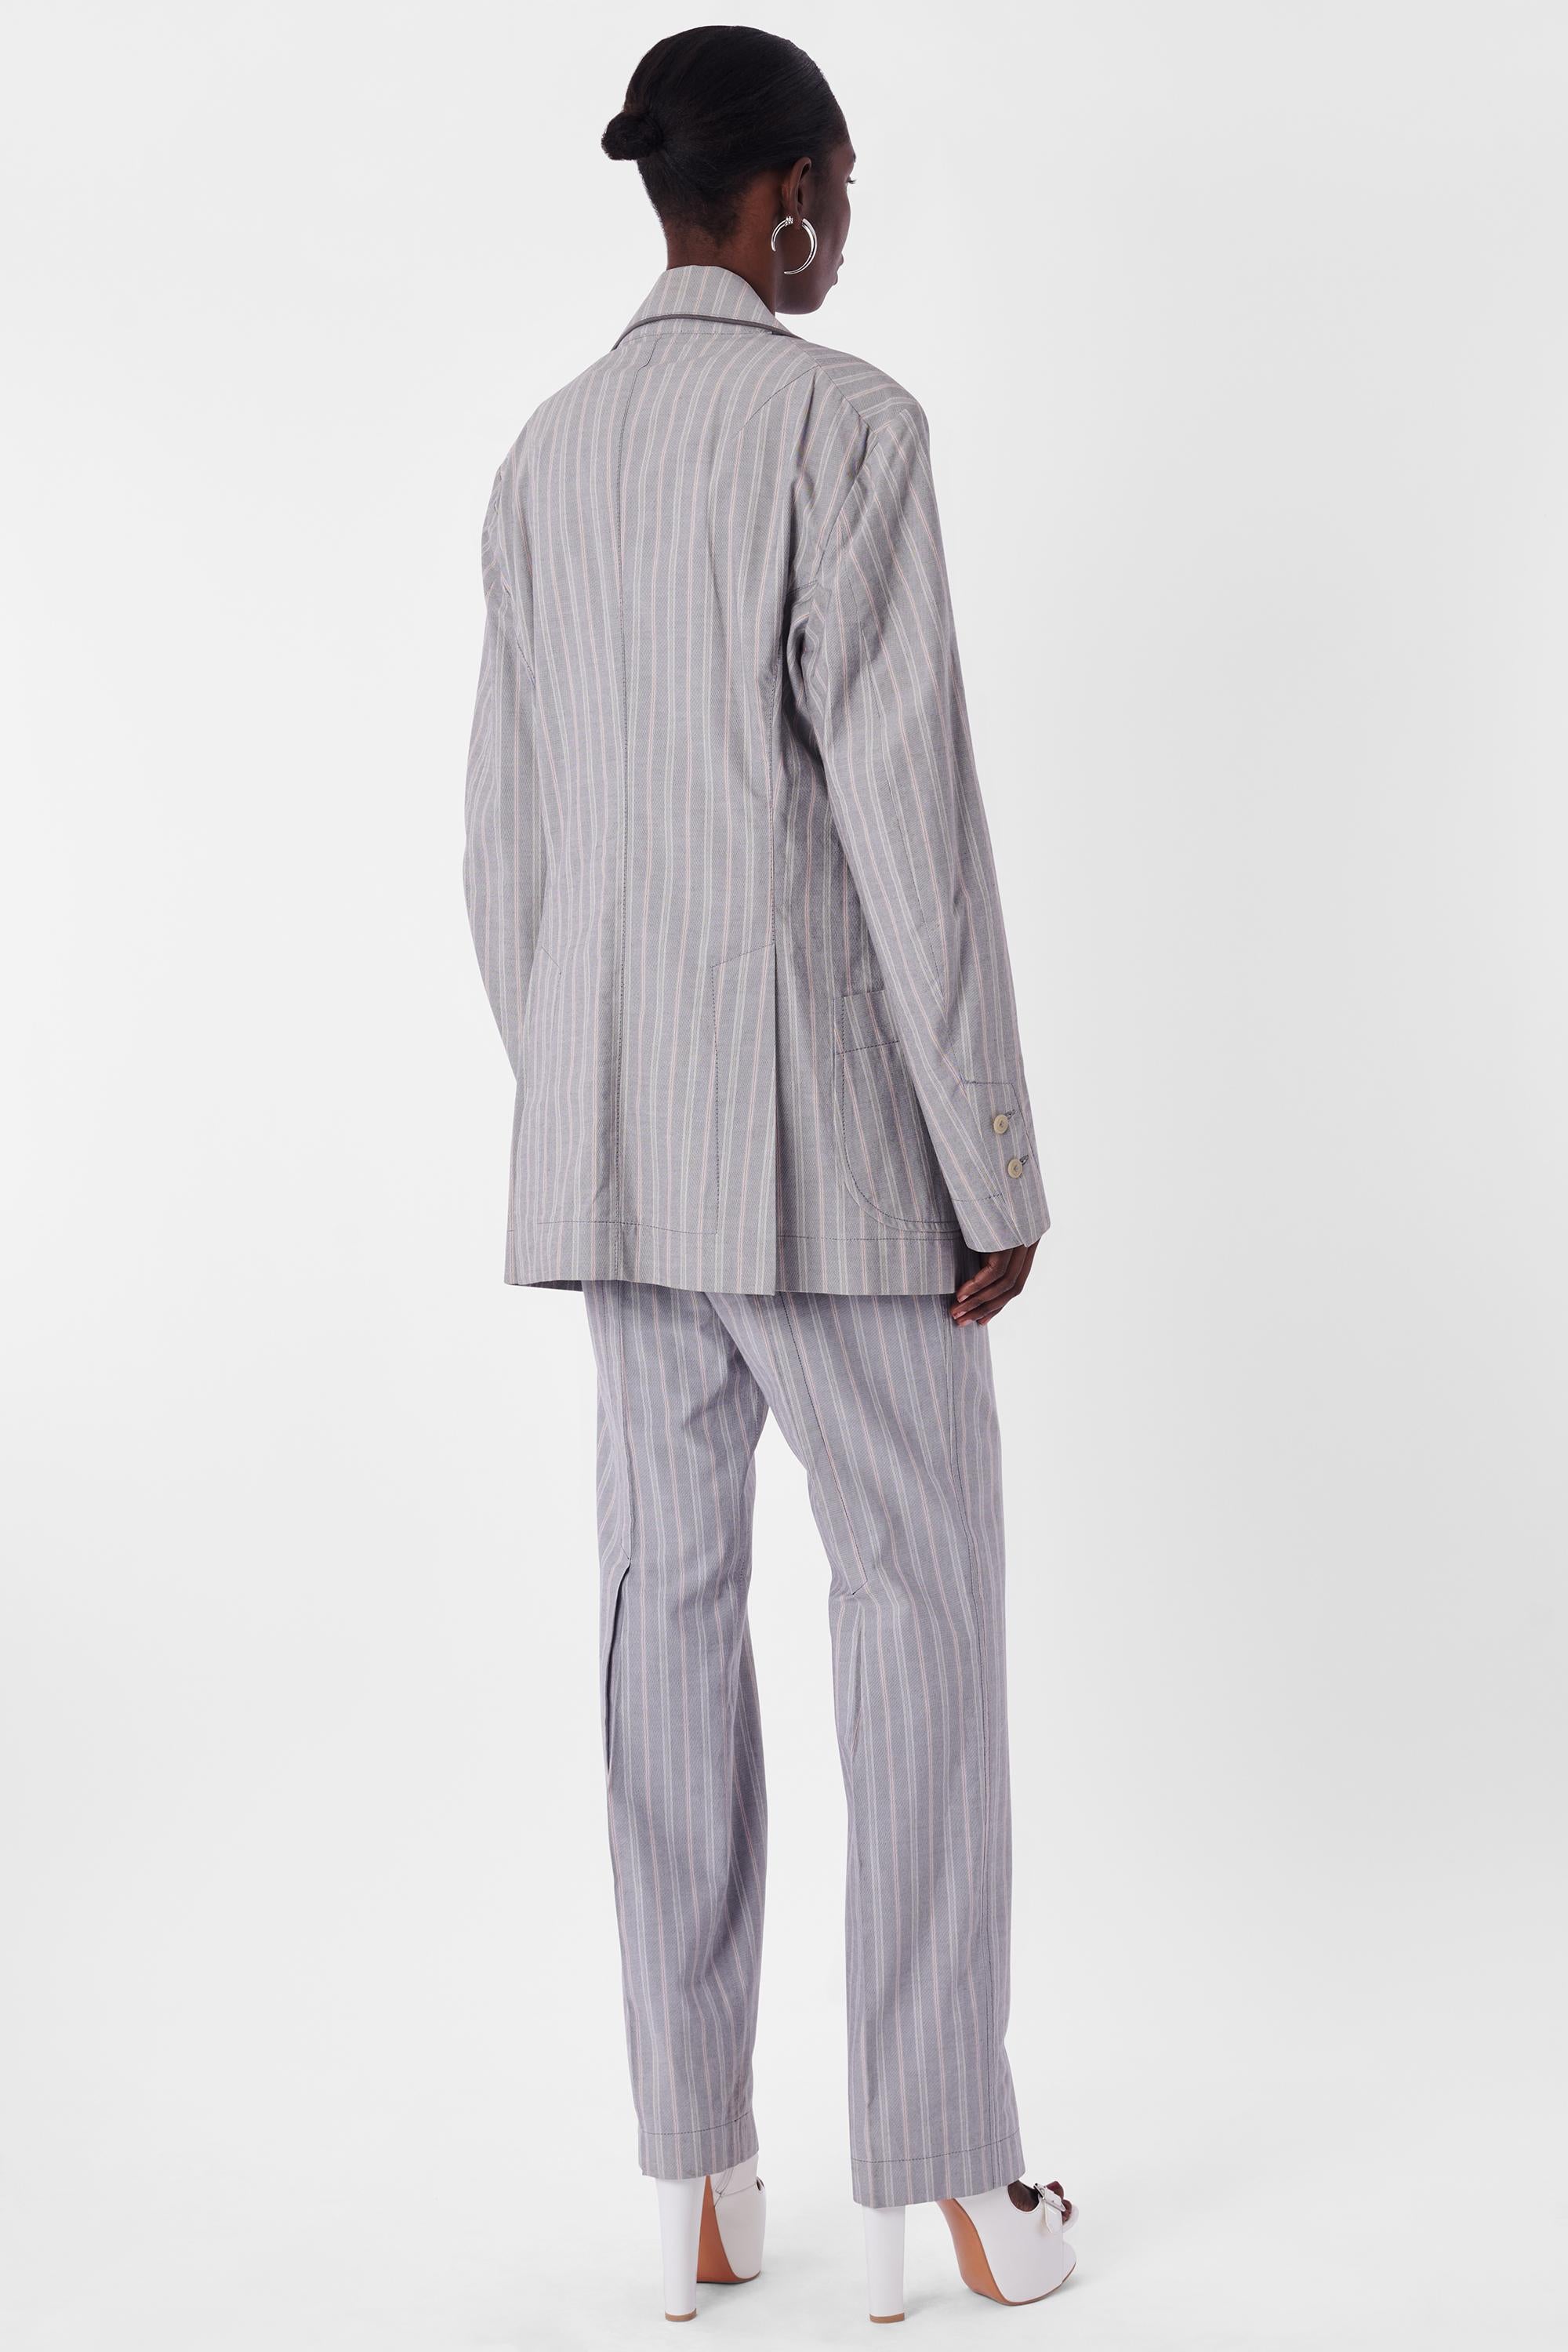 Vintage S/S 1991 Pinstripe grey Suit In Excellent Condition For Sale In London, GB